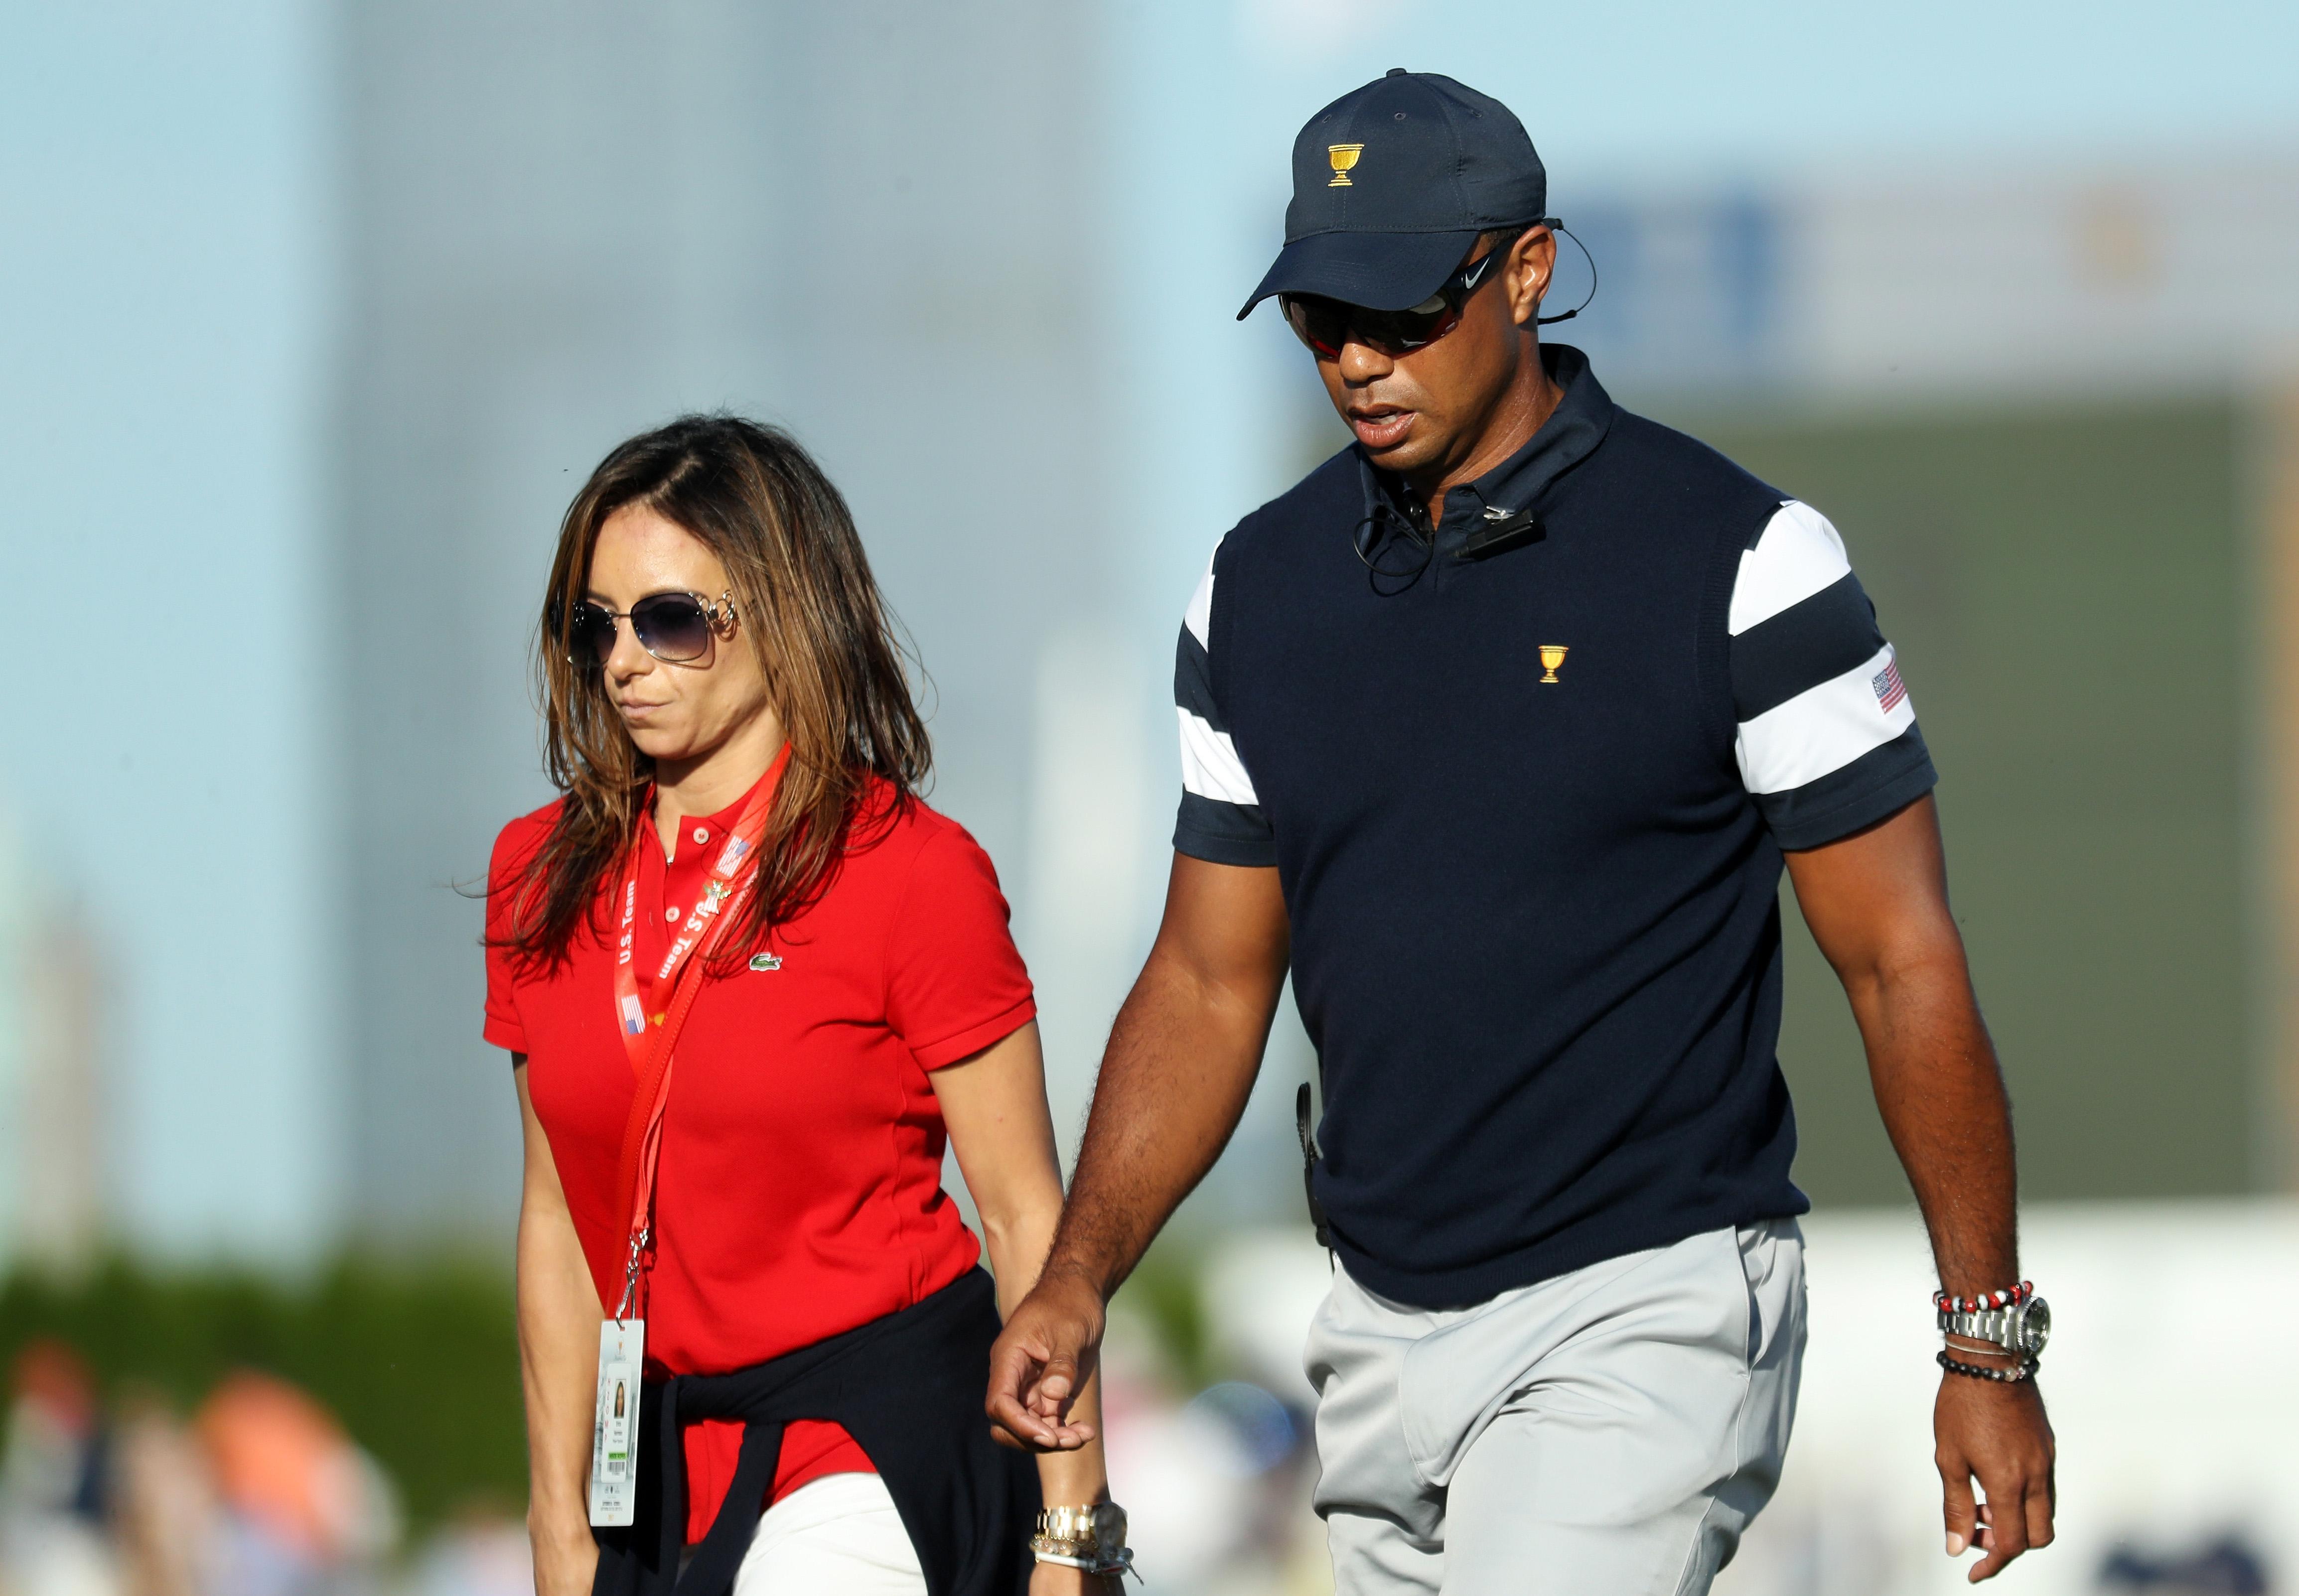 Now is tigers girlfriend Tiger Woods’